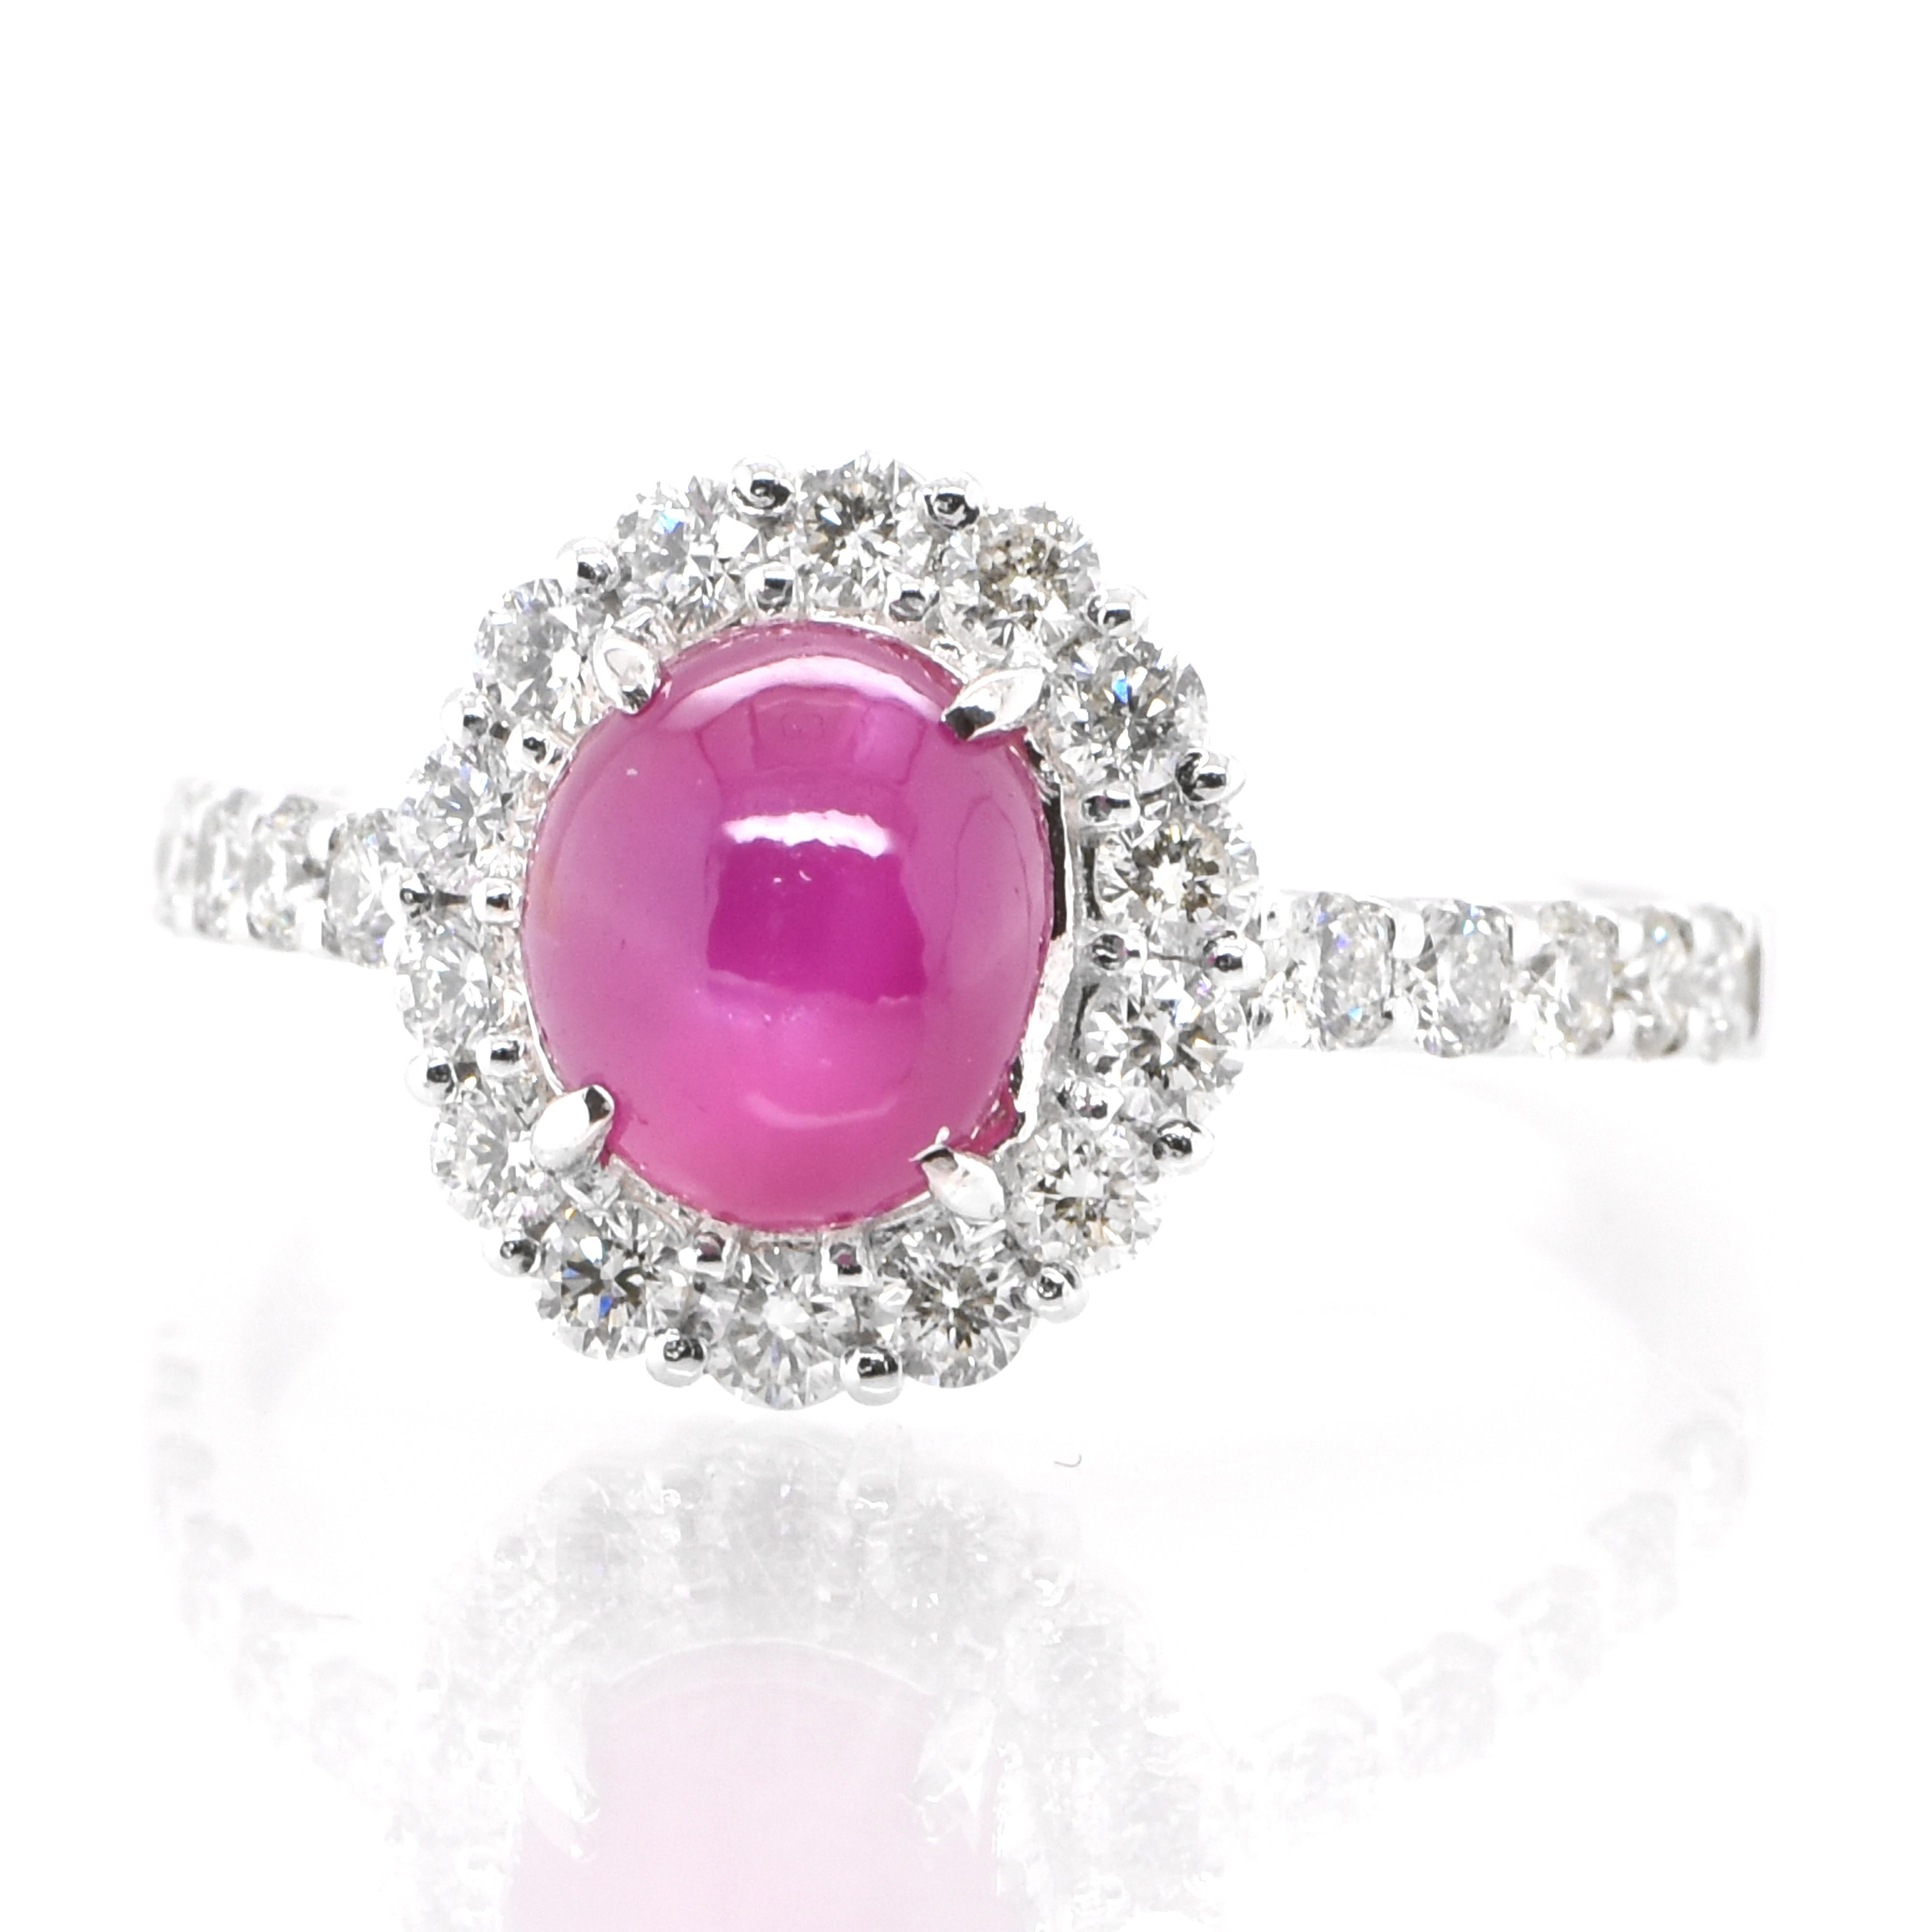 A beautiful ring set in Platinum featuring a 2.42 Carat Natural Star Ruby and 0.60 Carat Diamonds. Rubies are referred to as 